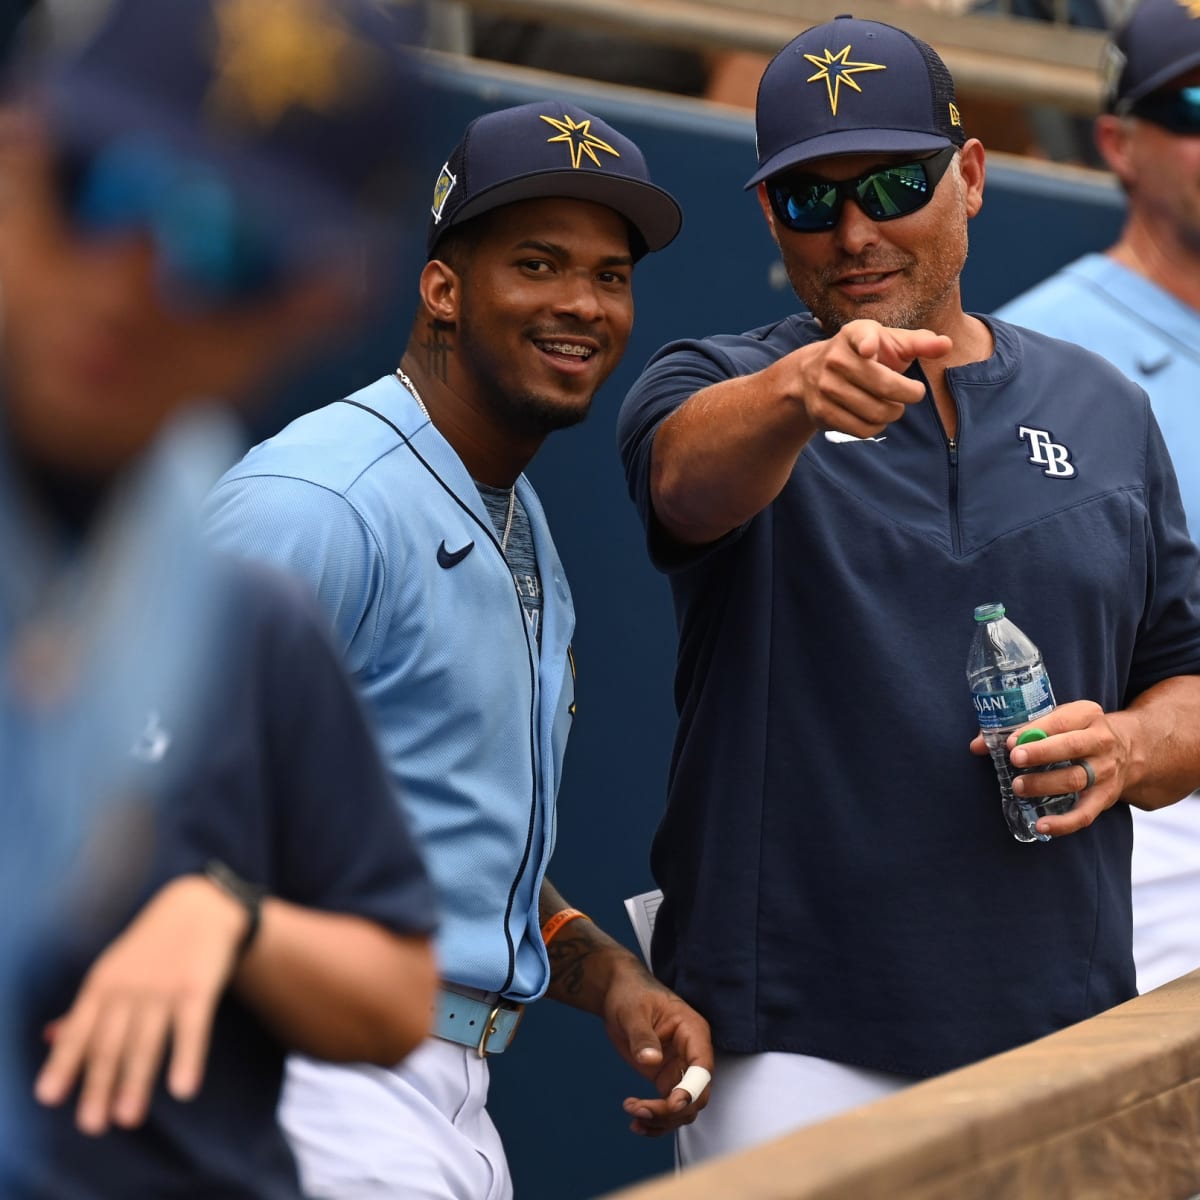 Tampa Bay Rays 2022 Spring Training Schedule, Results - Sports